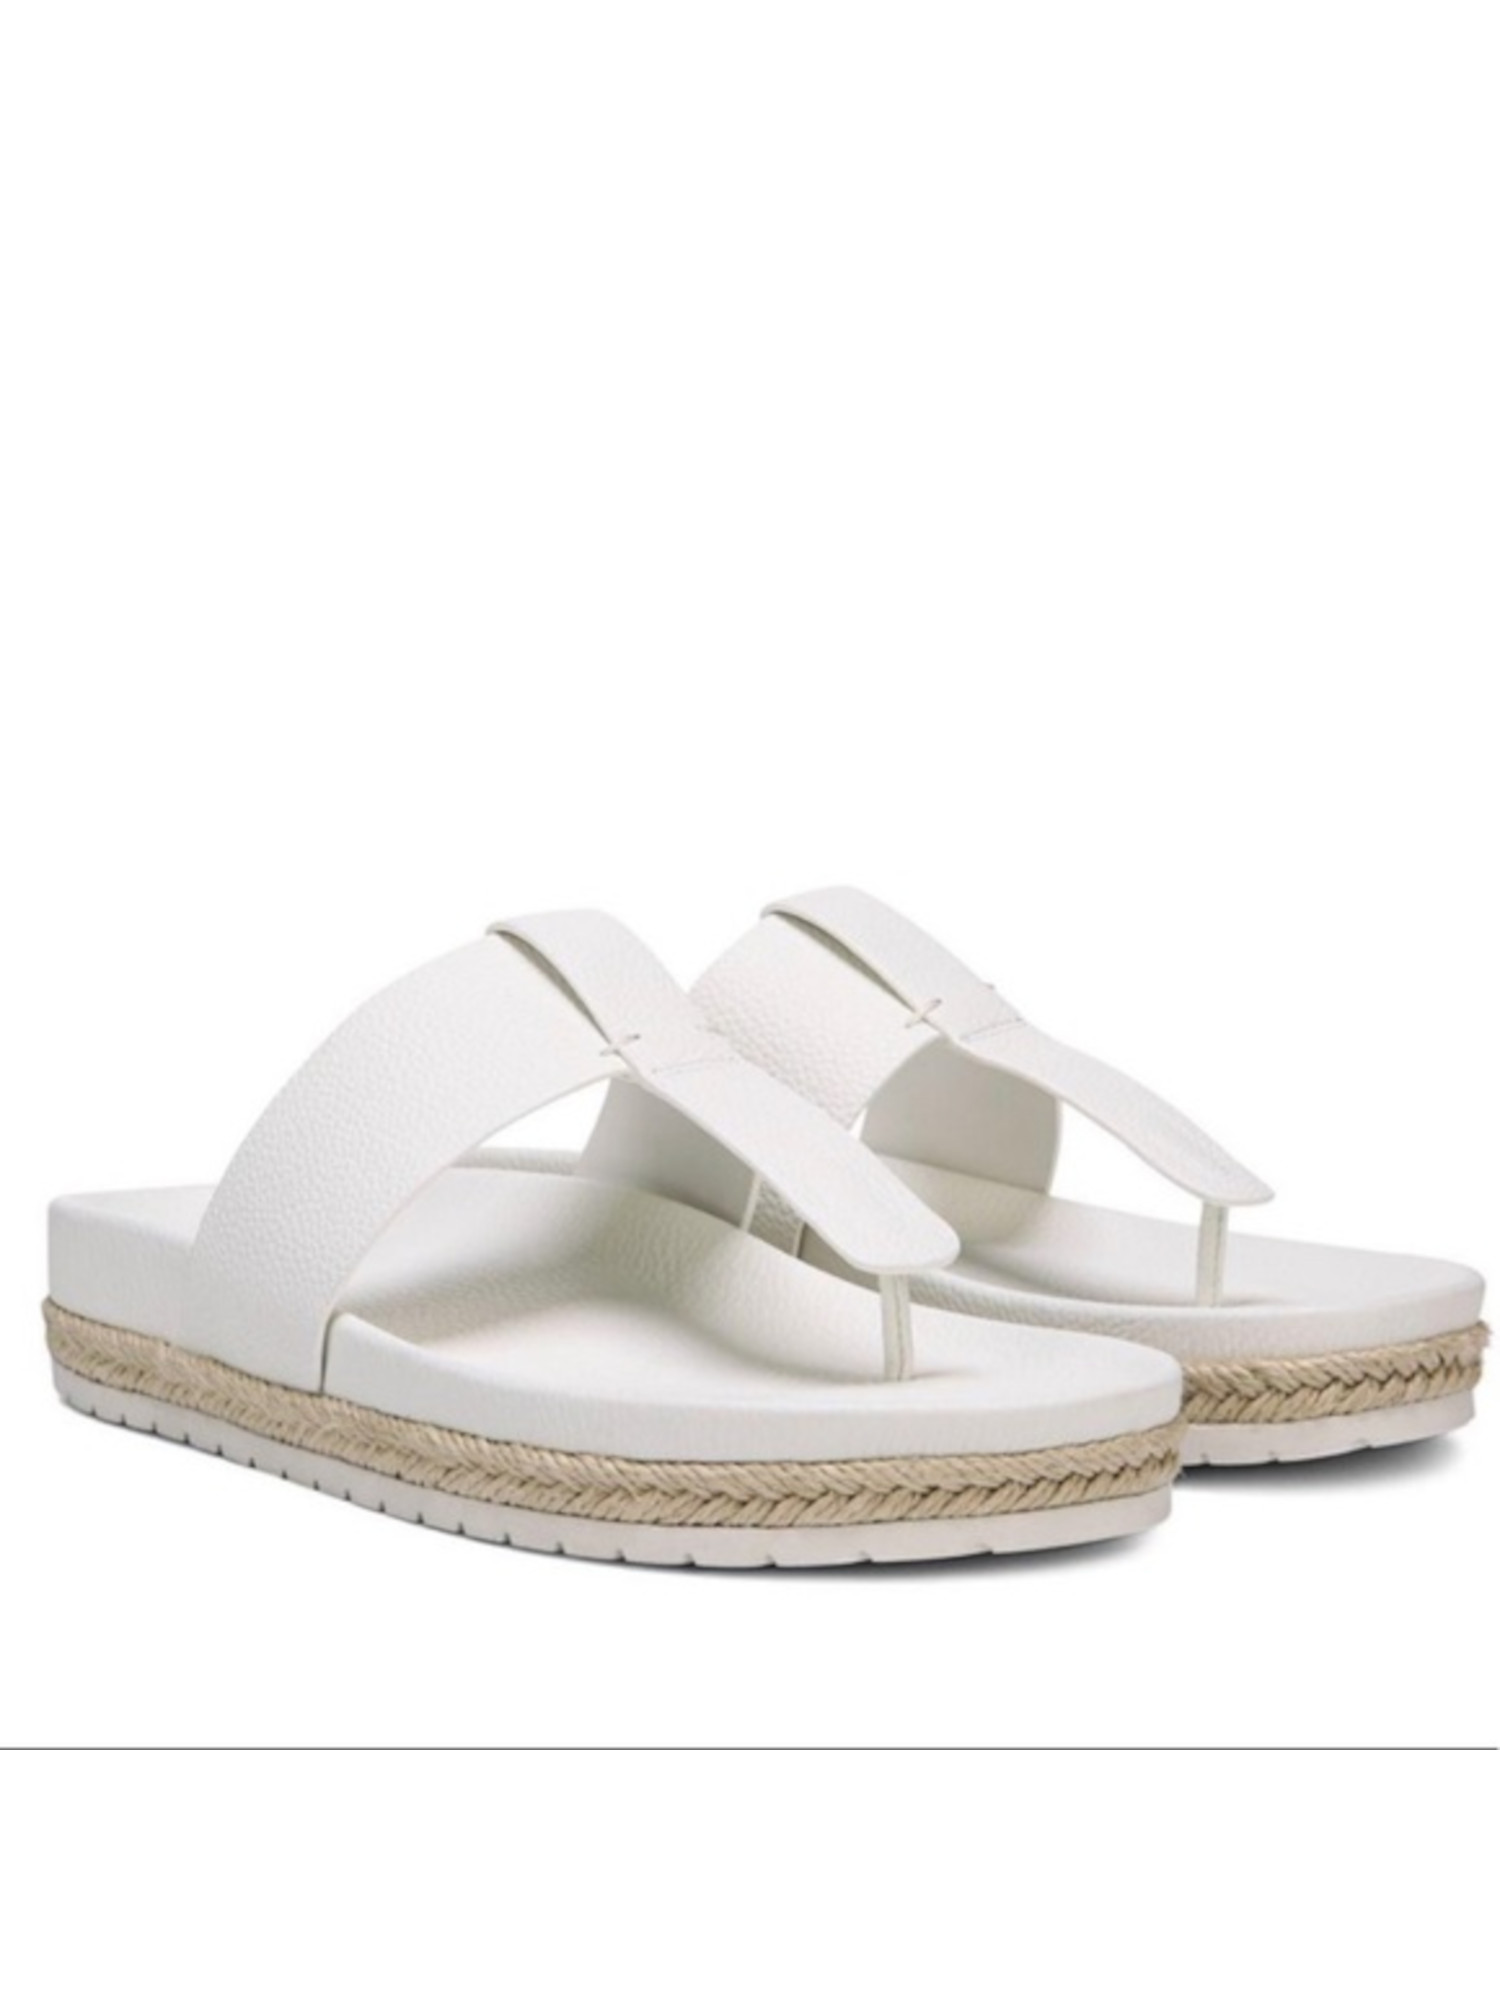 VINCE. Womens Pannacotta White Contoured Footbed T-Strap Padded Avani Round Toe Platform Slip On Leather Thong Sandals Shoes 9 M